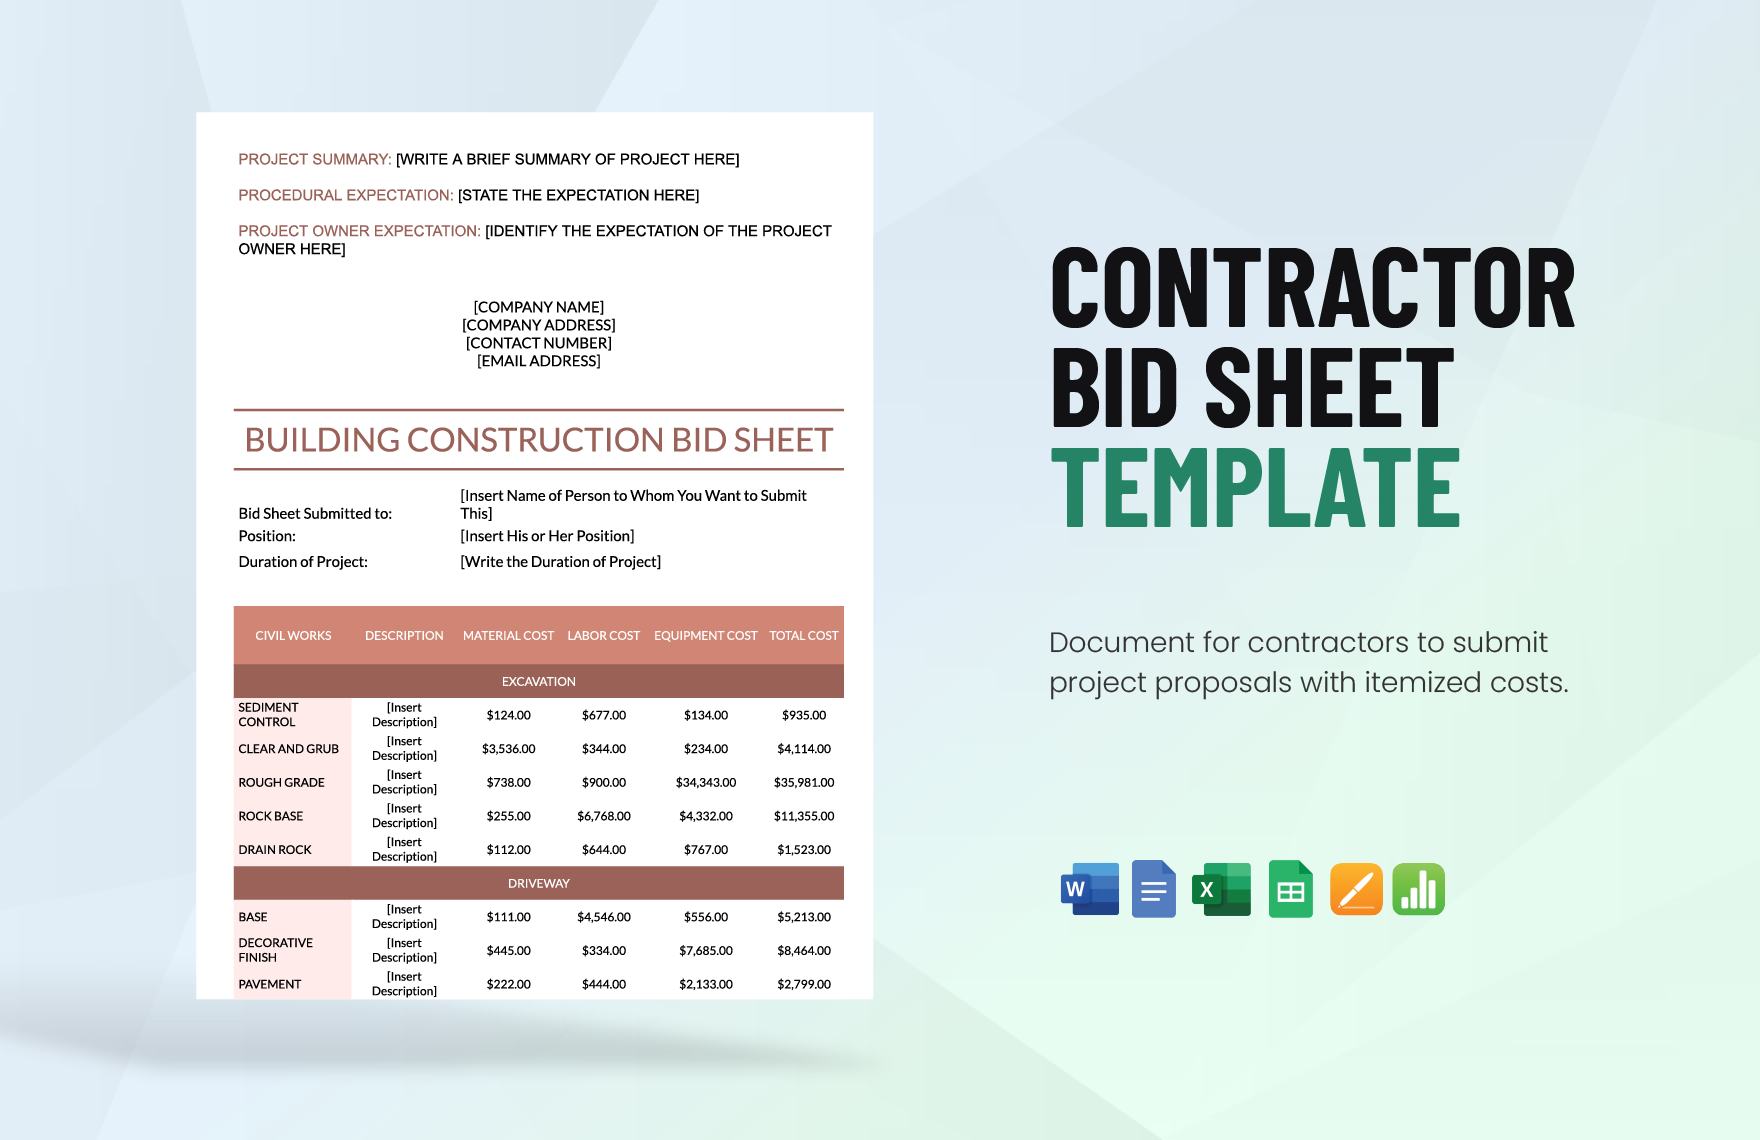 Contractor Bid Sheet Template in Word, Google Docs, Excel, Google Sheets, Apple Pages, Apple Numbers